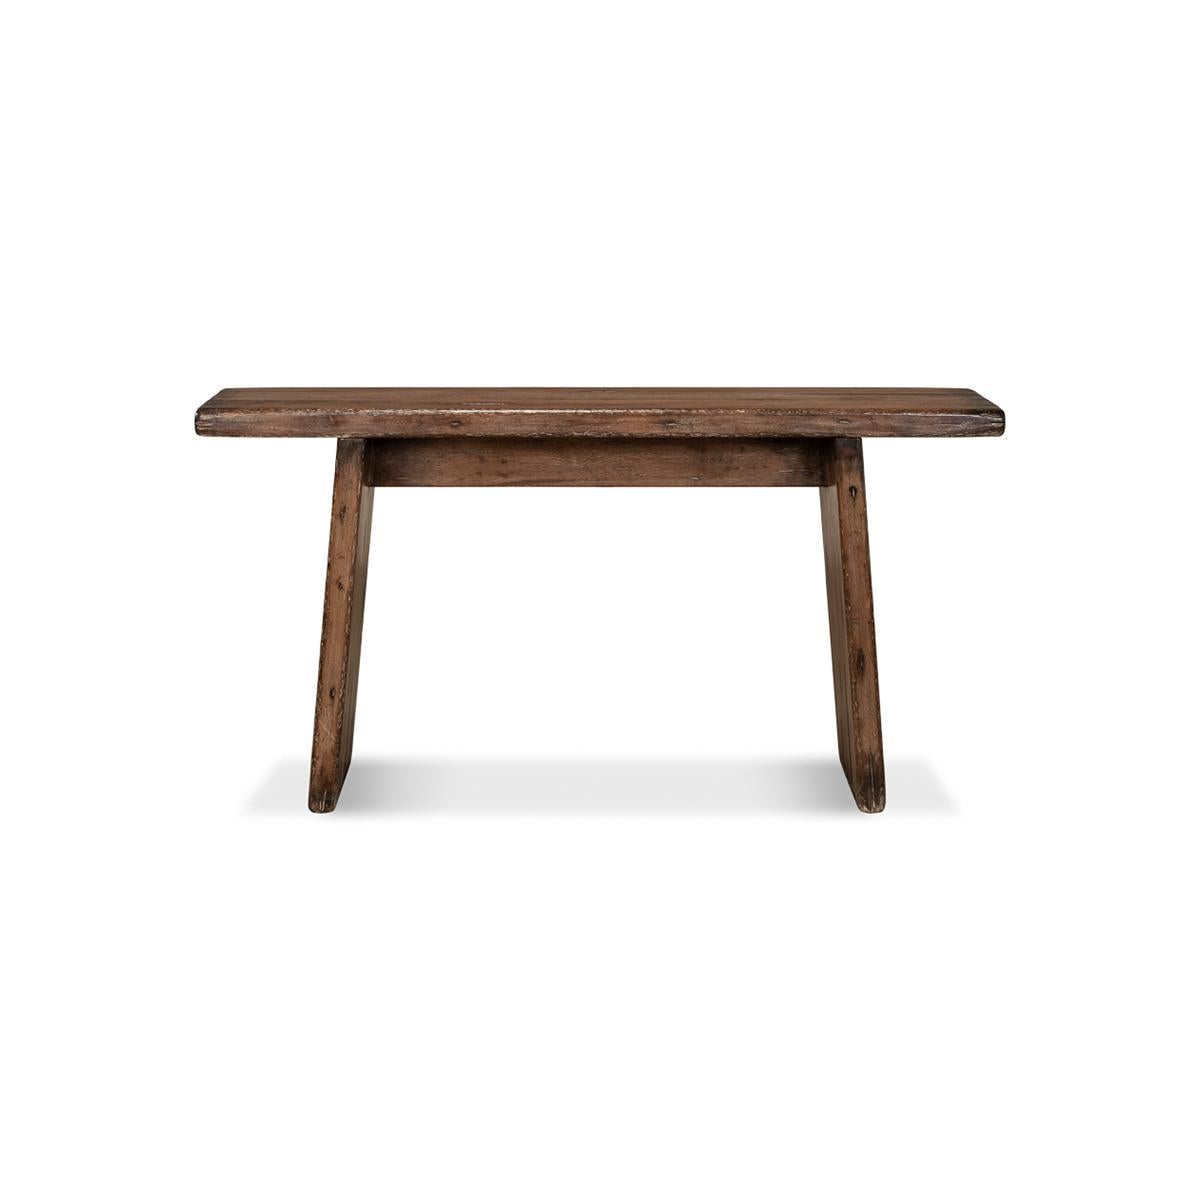 Farm house hall table, a large old pine planks and beams in a rustic brown farmhouse finish. A casual modern simple console table.

Dimensions: 63